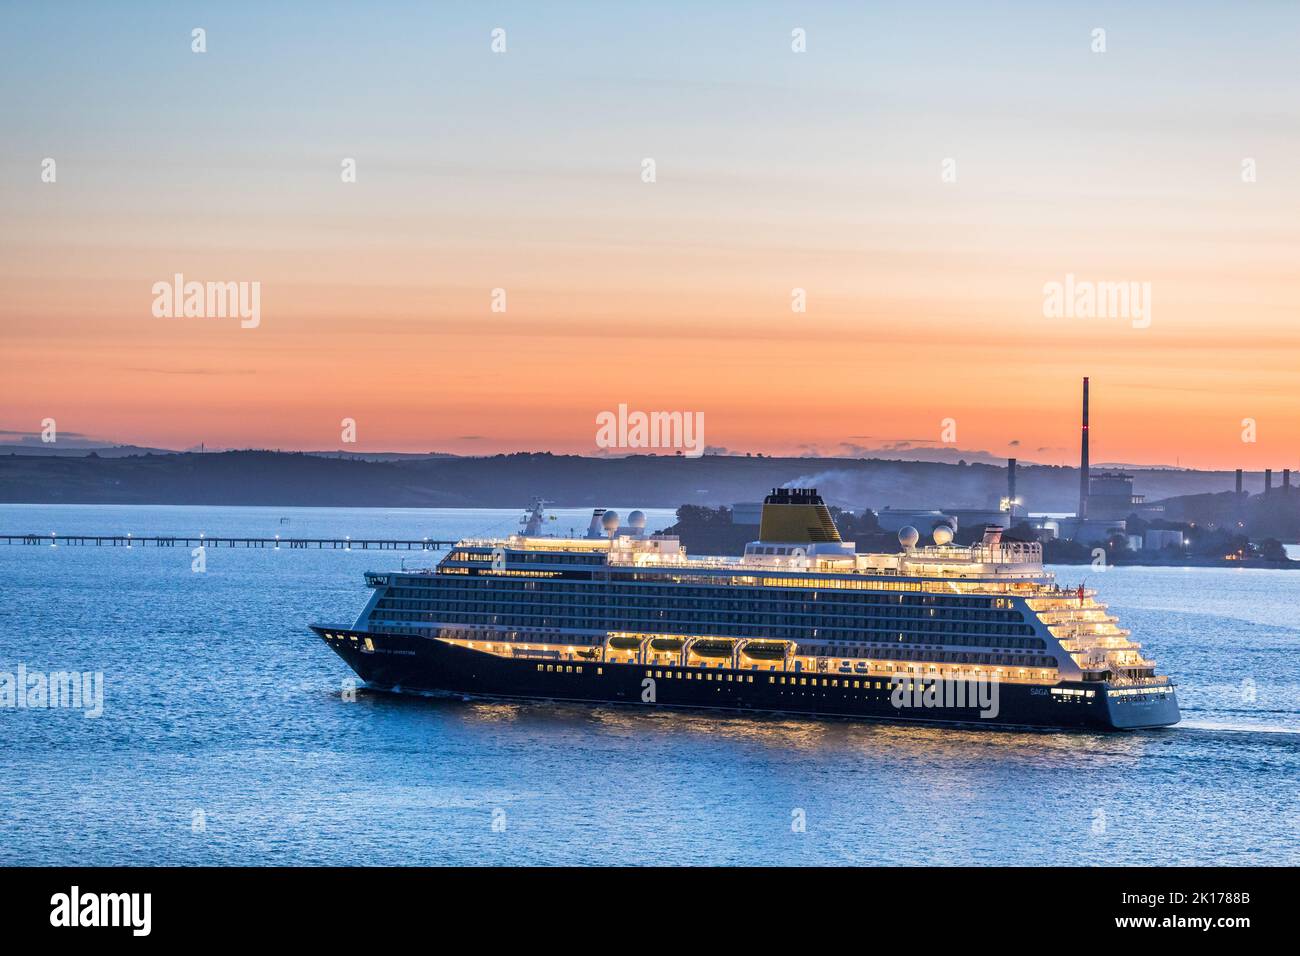 Aghada, Cork, Ireland. 16th September 2022. Cruise ship Spirit of Adventure passing the ESB generating station in Aghada while on her way for a visit to Cobh, Co. Cork, Ireland. - Credit; David Creedon / Alamy Live News Stock Photo